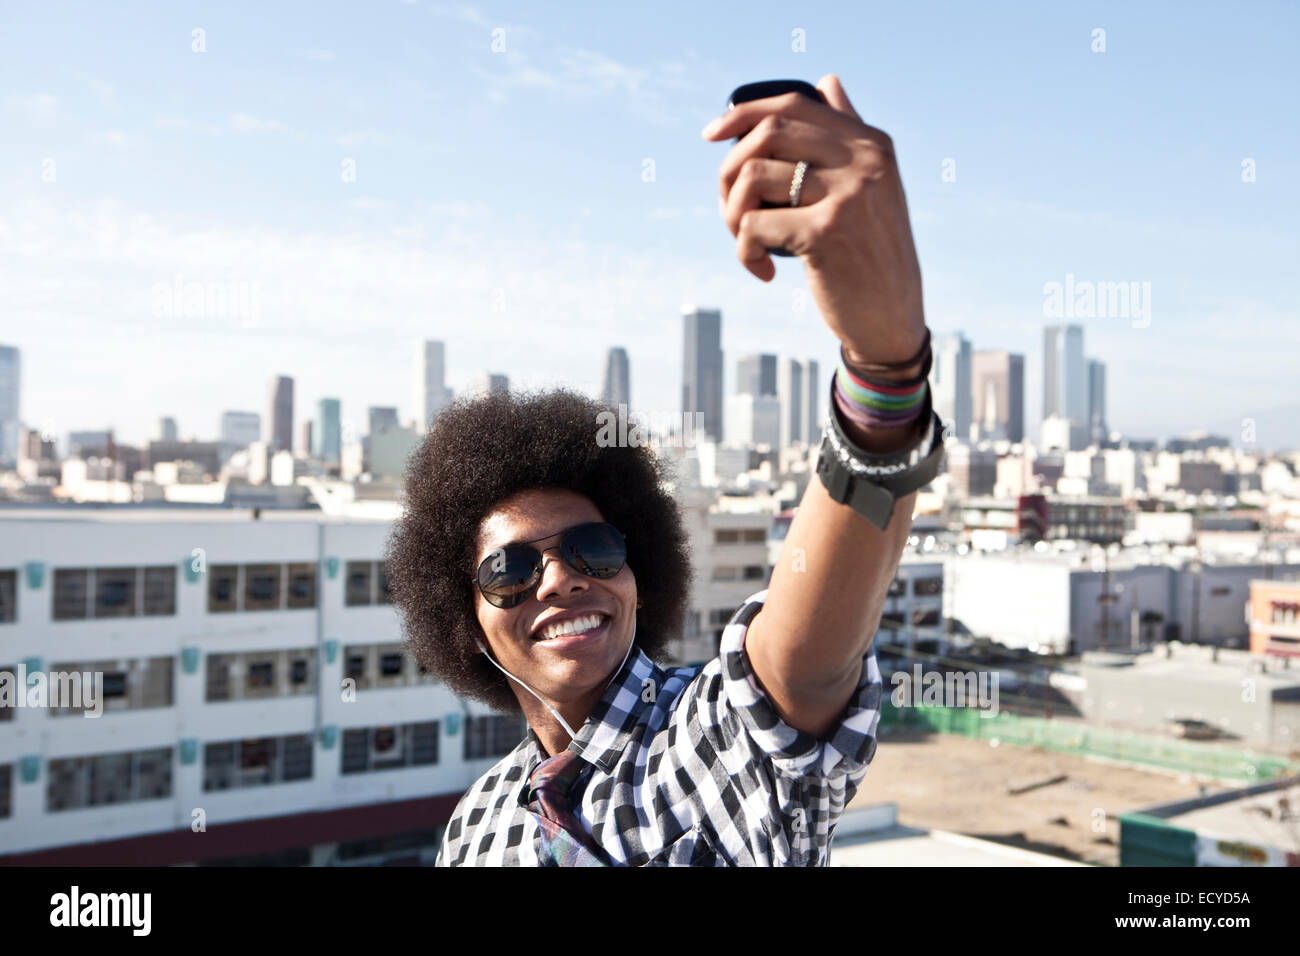 African American man taking cell phone picture from urban rooftop Stock Photo